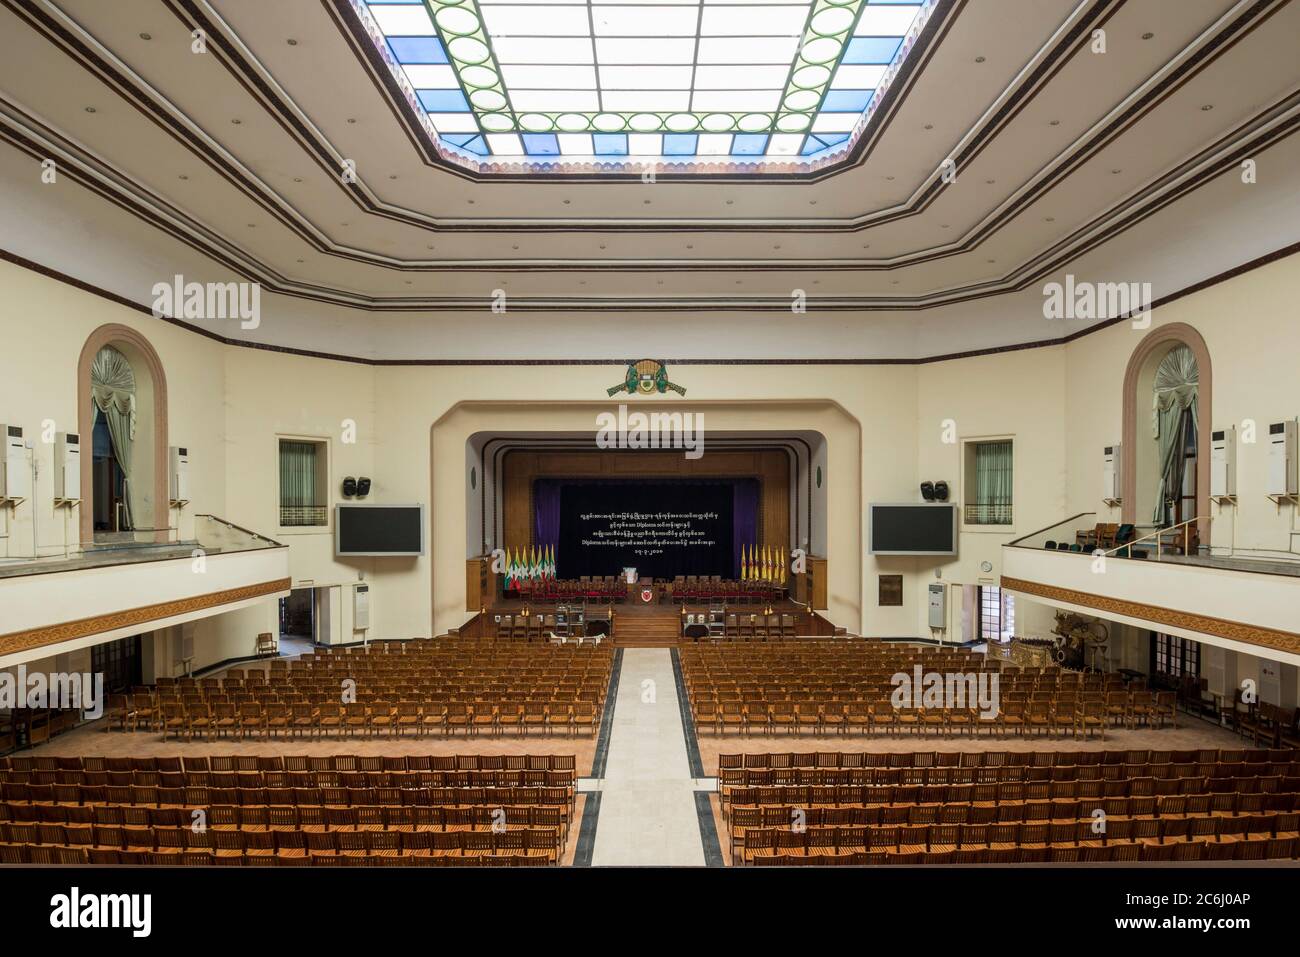 Interior of Convocation Hall lecture theatre, designed by Thomas Oliphant Foster. Yangon University, Yangon, Burma (Myanmar). Architect: various, 1927 Stock Photo